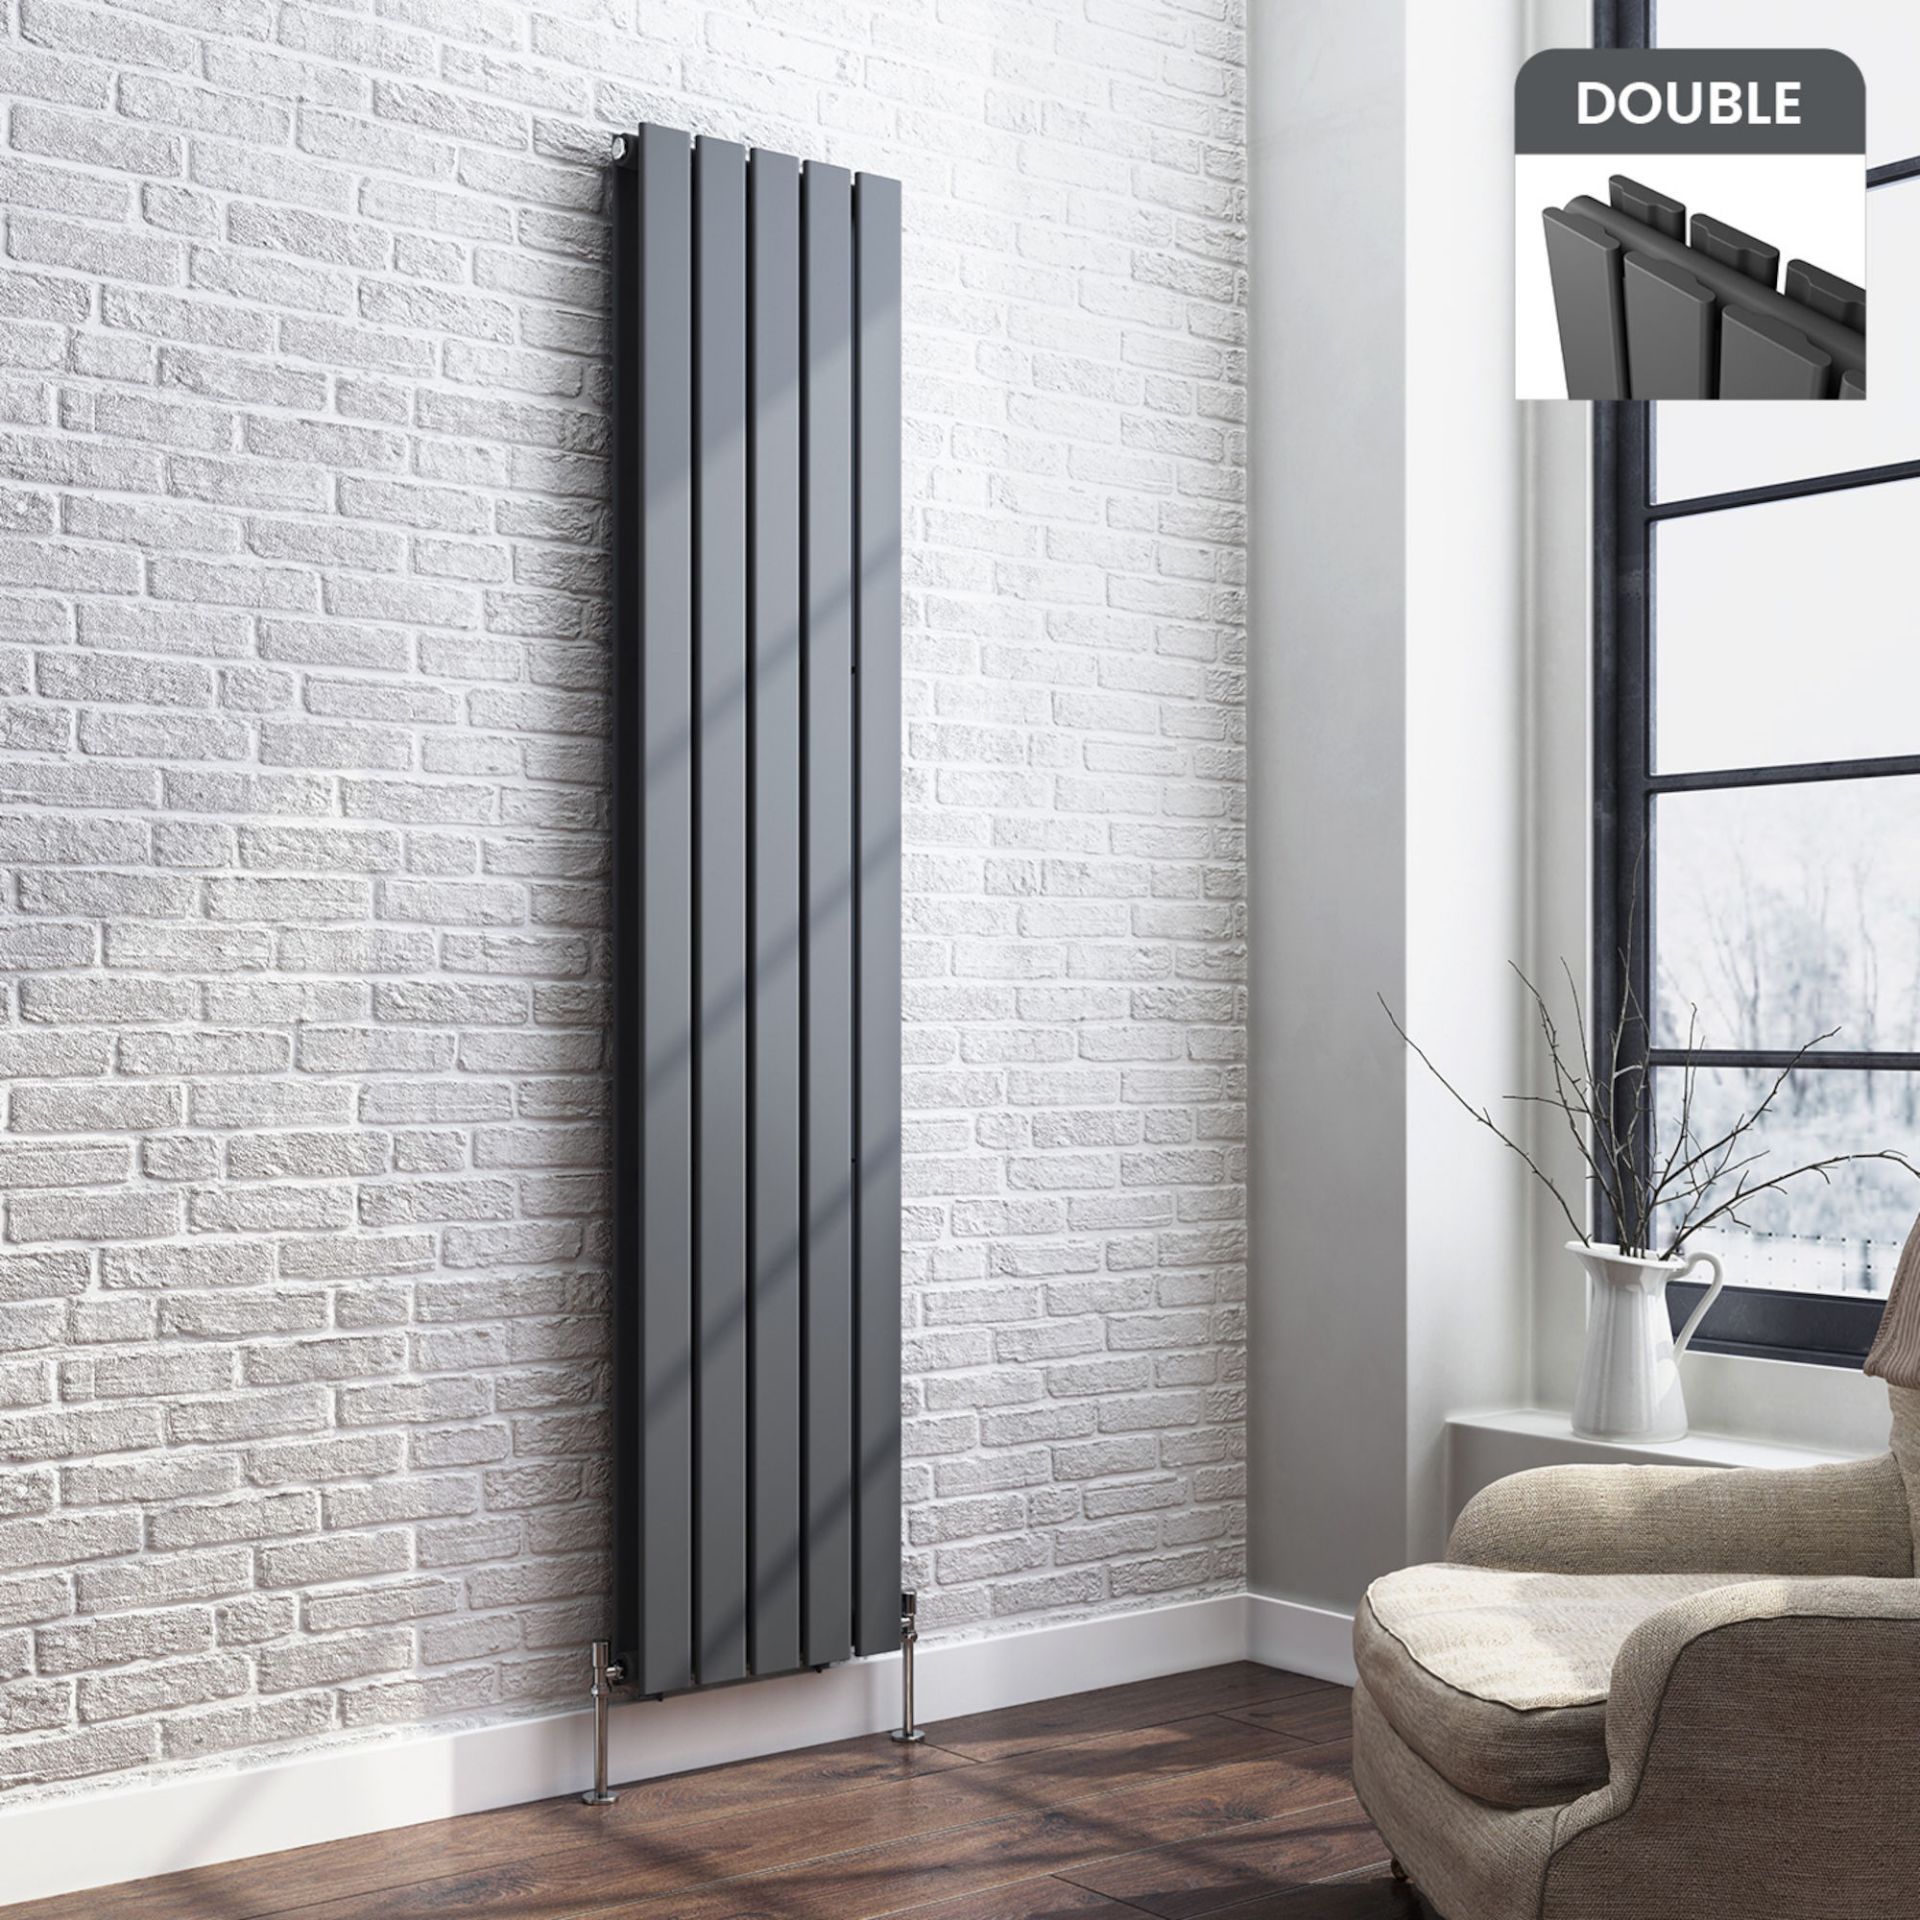 (CT182) 1800x376mm Anthracite Double Flat Panel Vertical Radiator. RRP £444.99. Made with low carbon